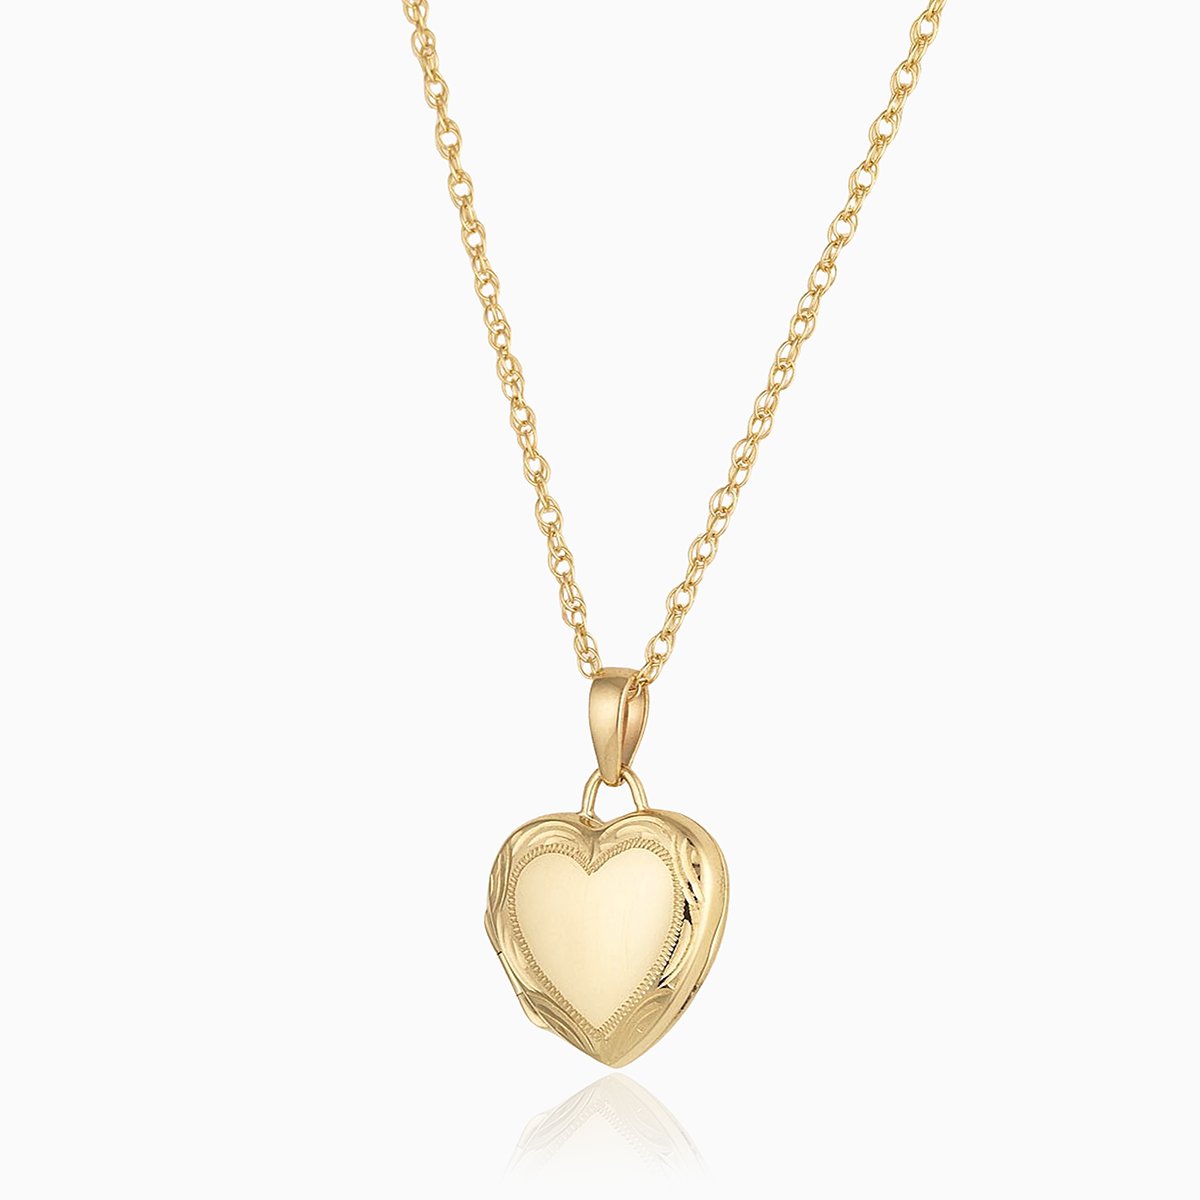 9 ct gold heart lcoekt with an engraved border on a 9 ct gold rope chain